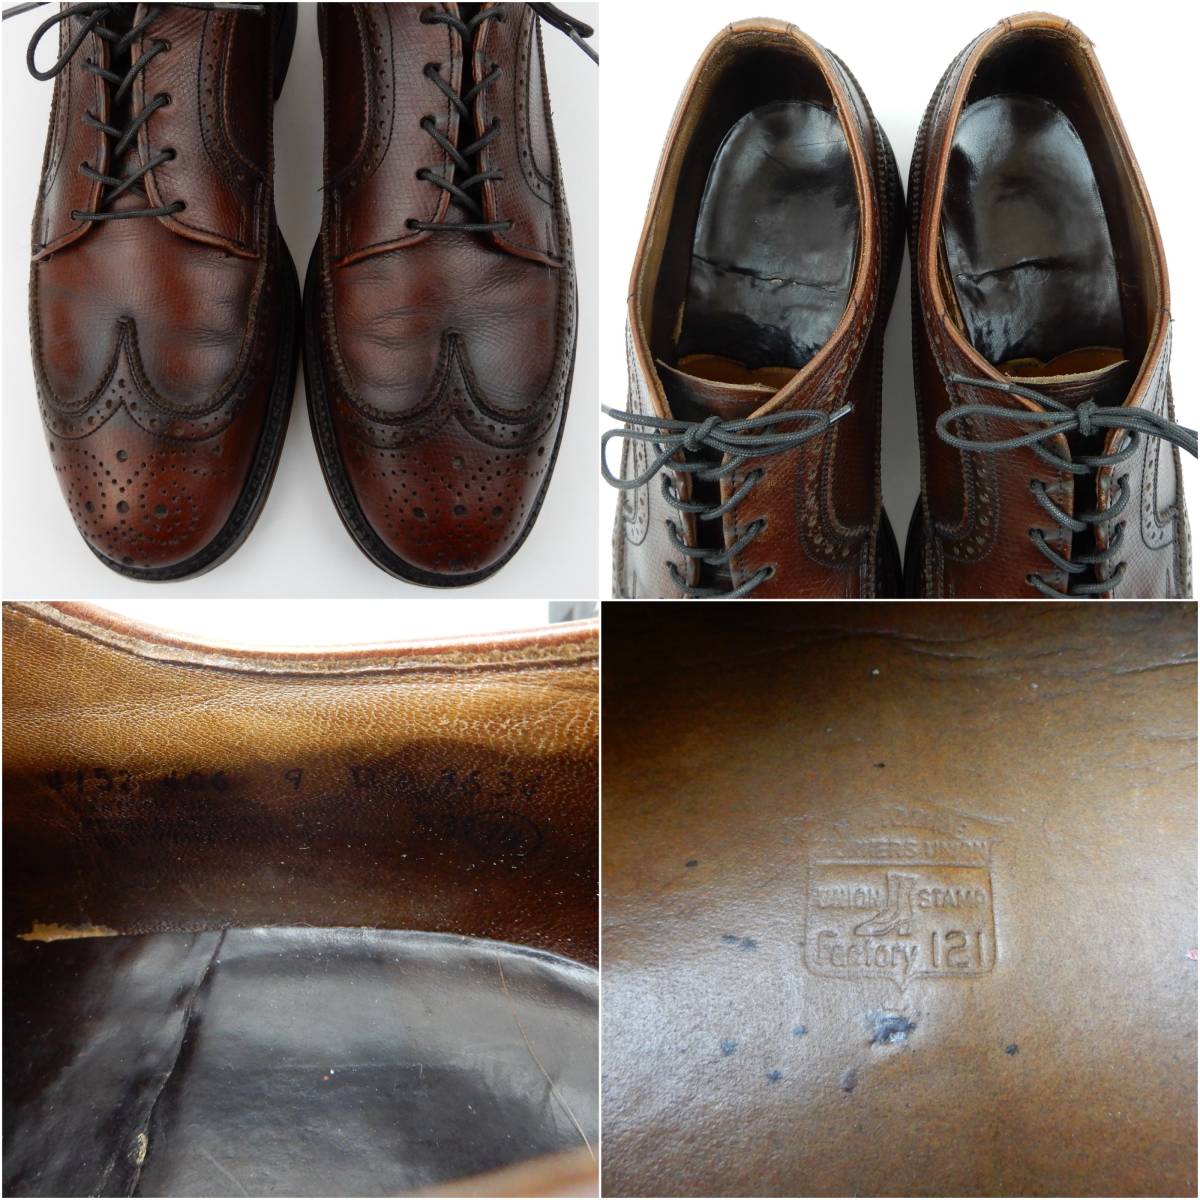 Crosby Square LONG WING TIP SHOES CAT'S PAW 1960s US9.0D Vintage クロスビースクエア ロングウィングチップ キャッツポゥ ヴィンテージ_画像8